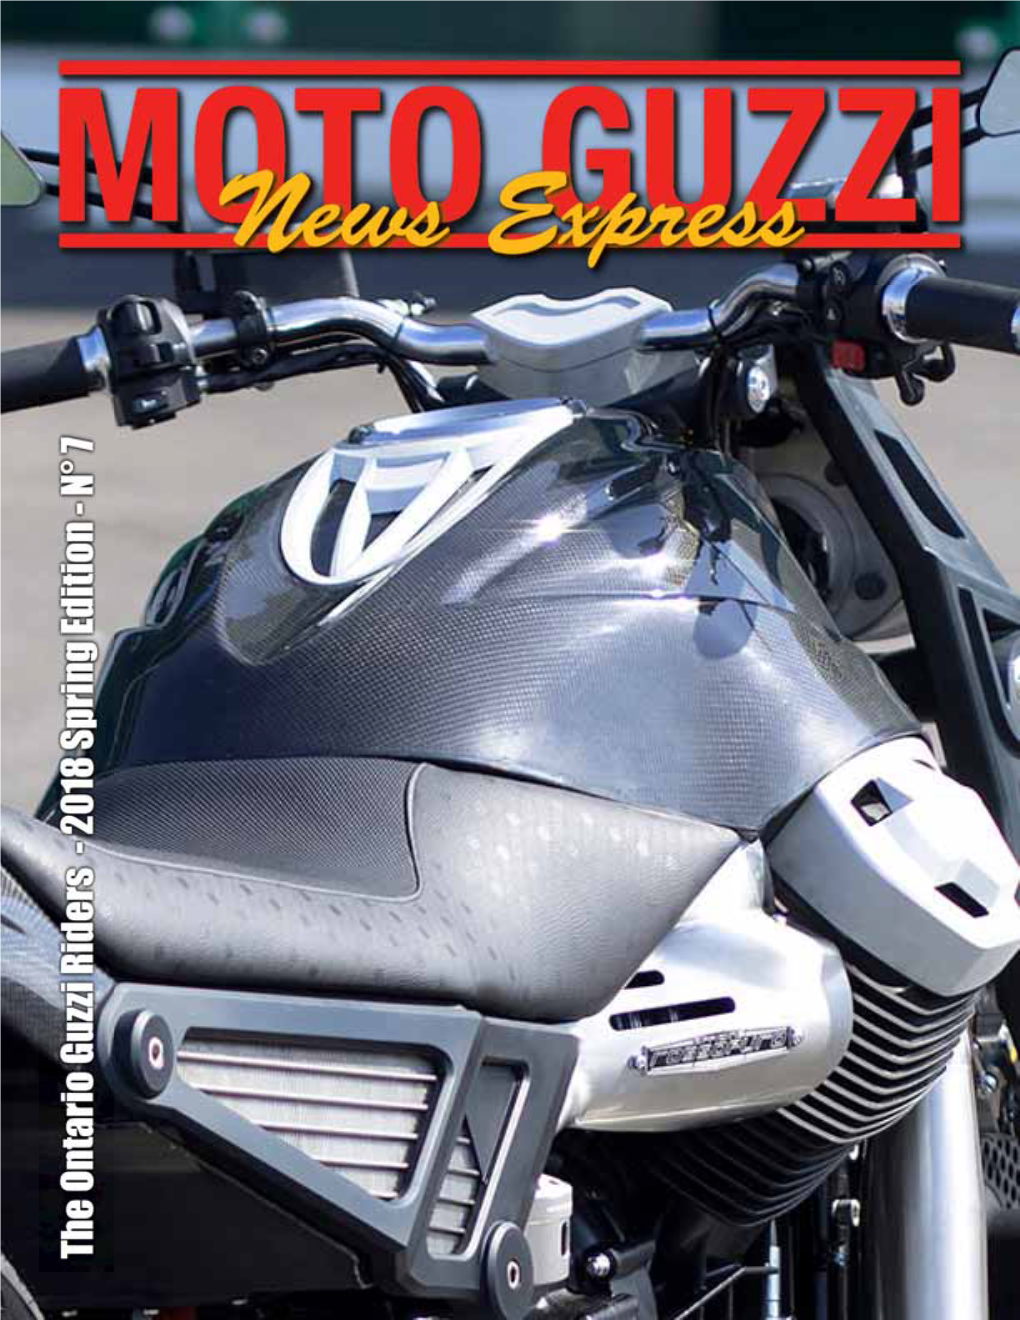 The Ontario Guzzi Riders 1 2017 News Express N°7 Well, Our Newsletter Is Starting Its Second Year